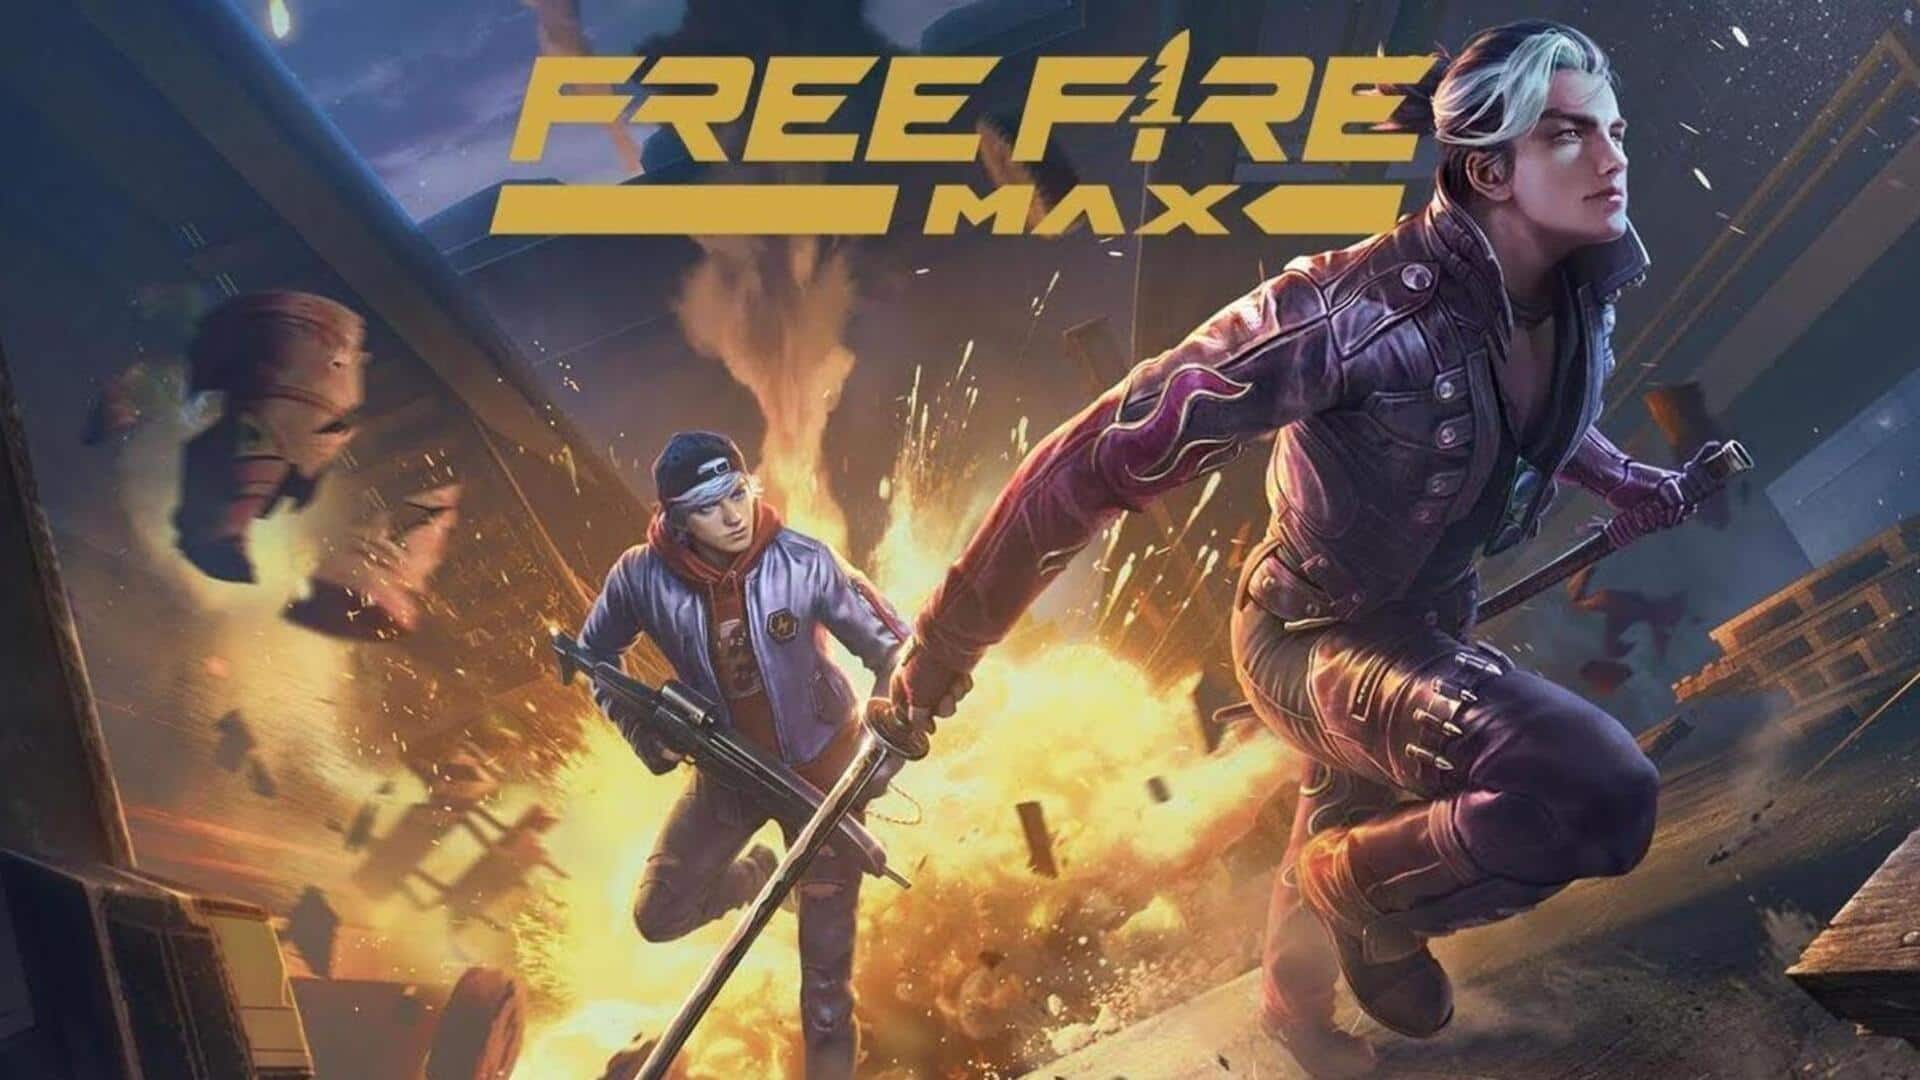 Garena Free Fire MAX codes for December 26 now available